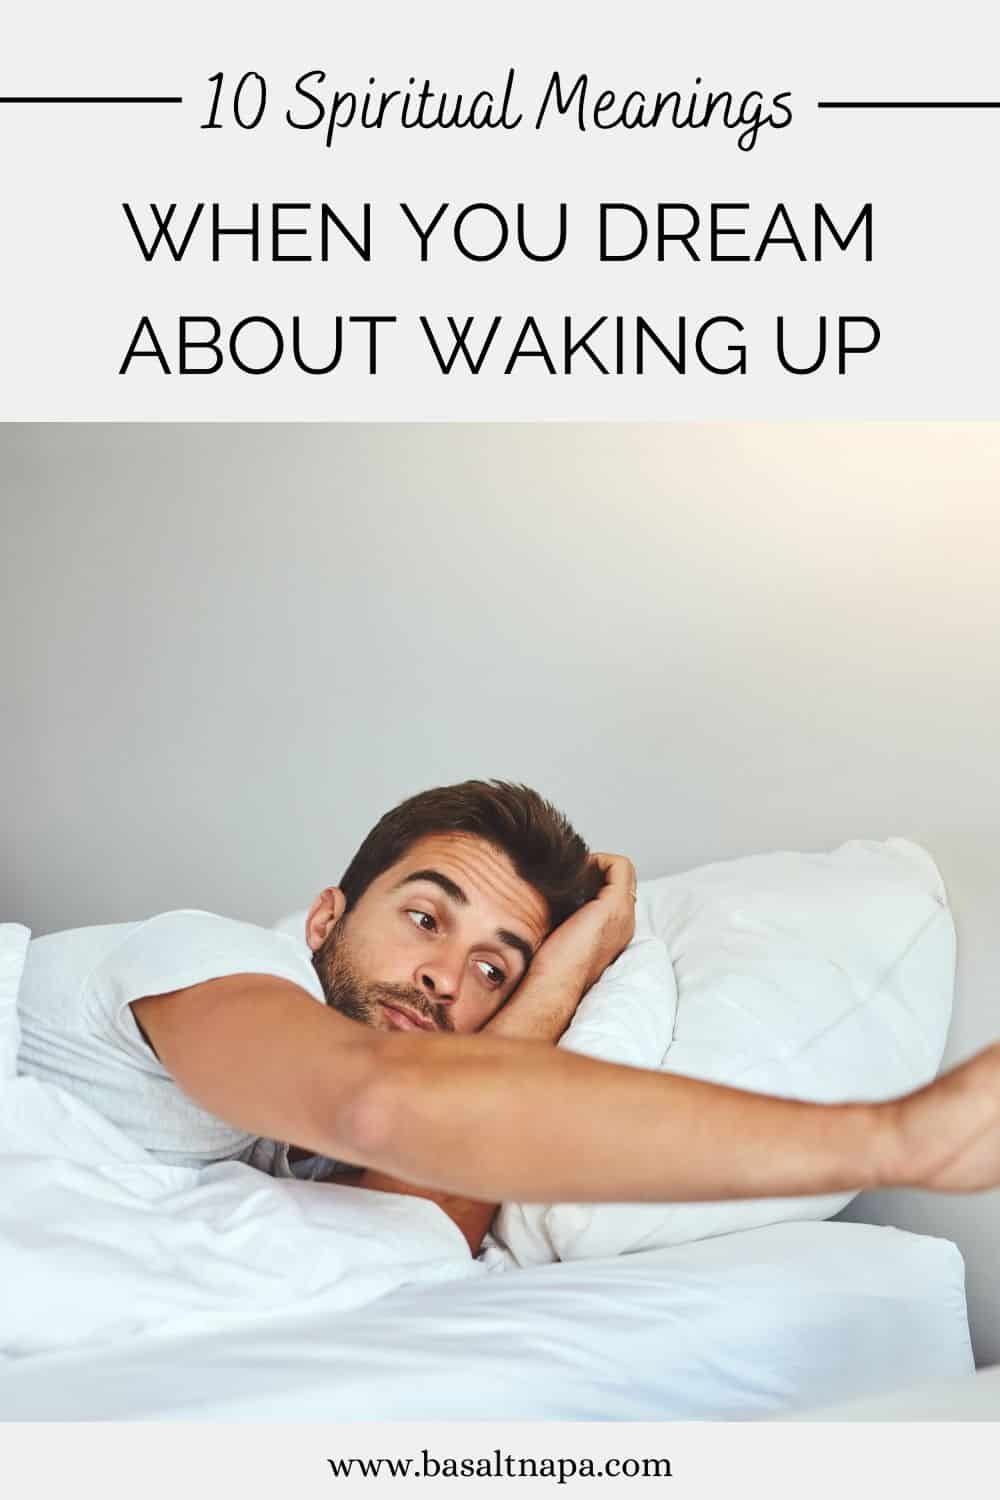 What Does It Mean If You Dream About Waking Up